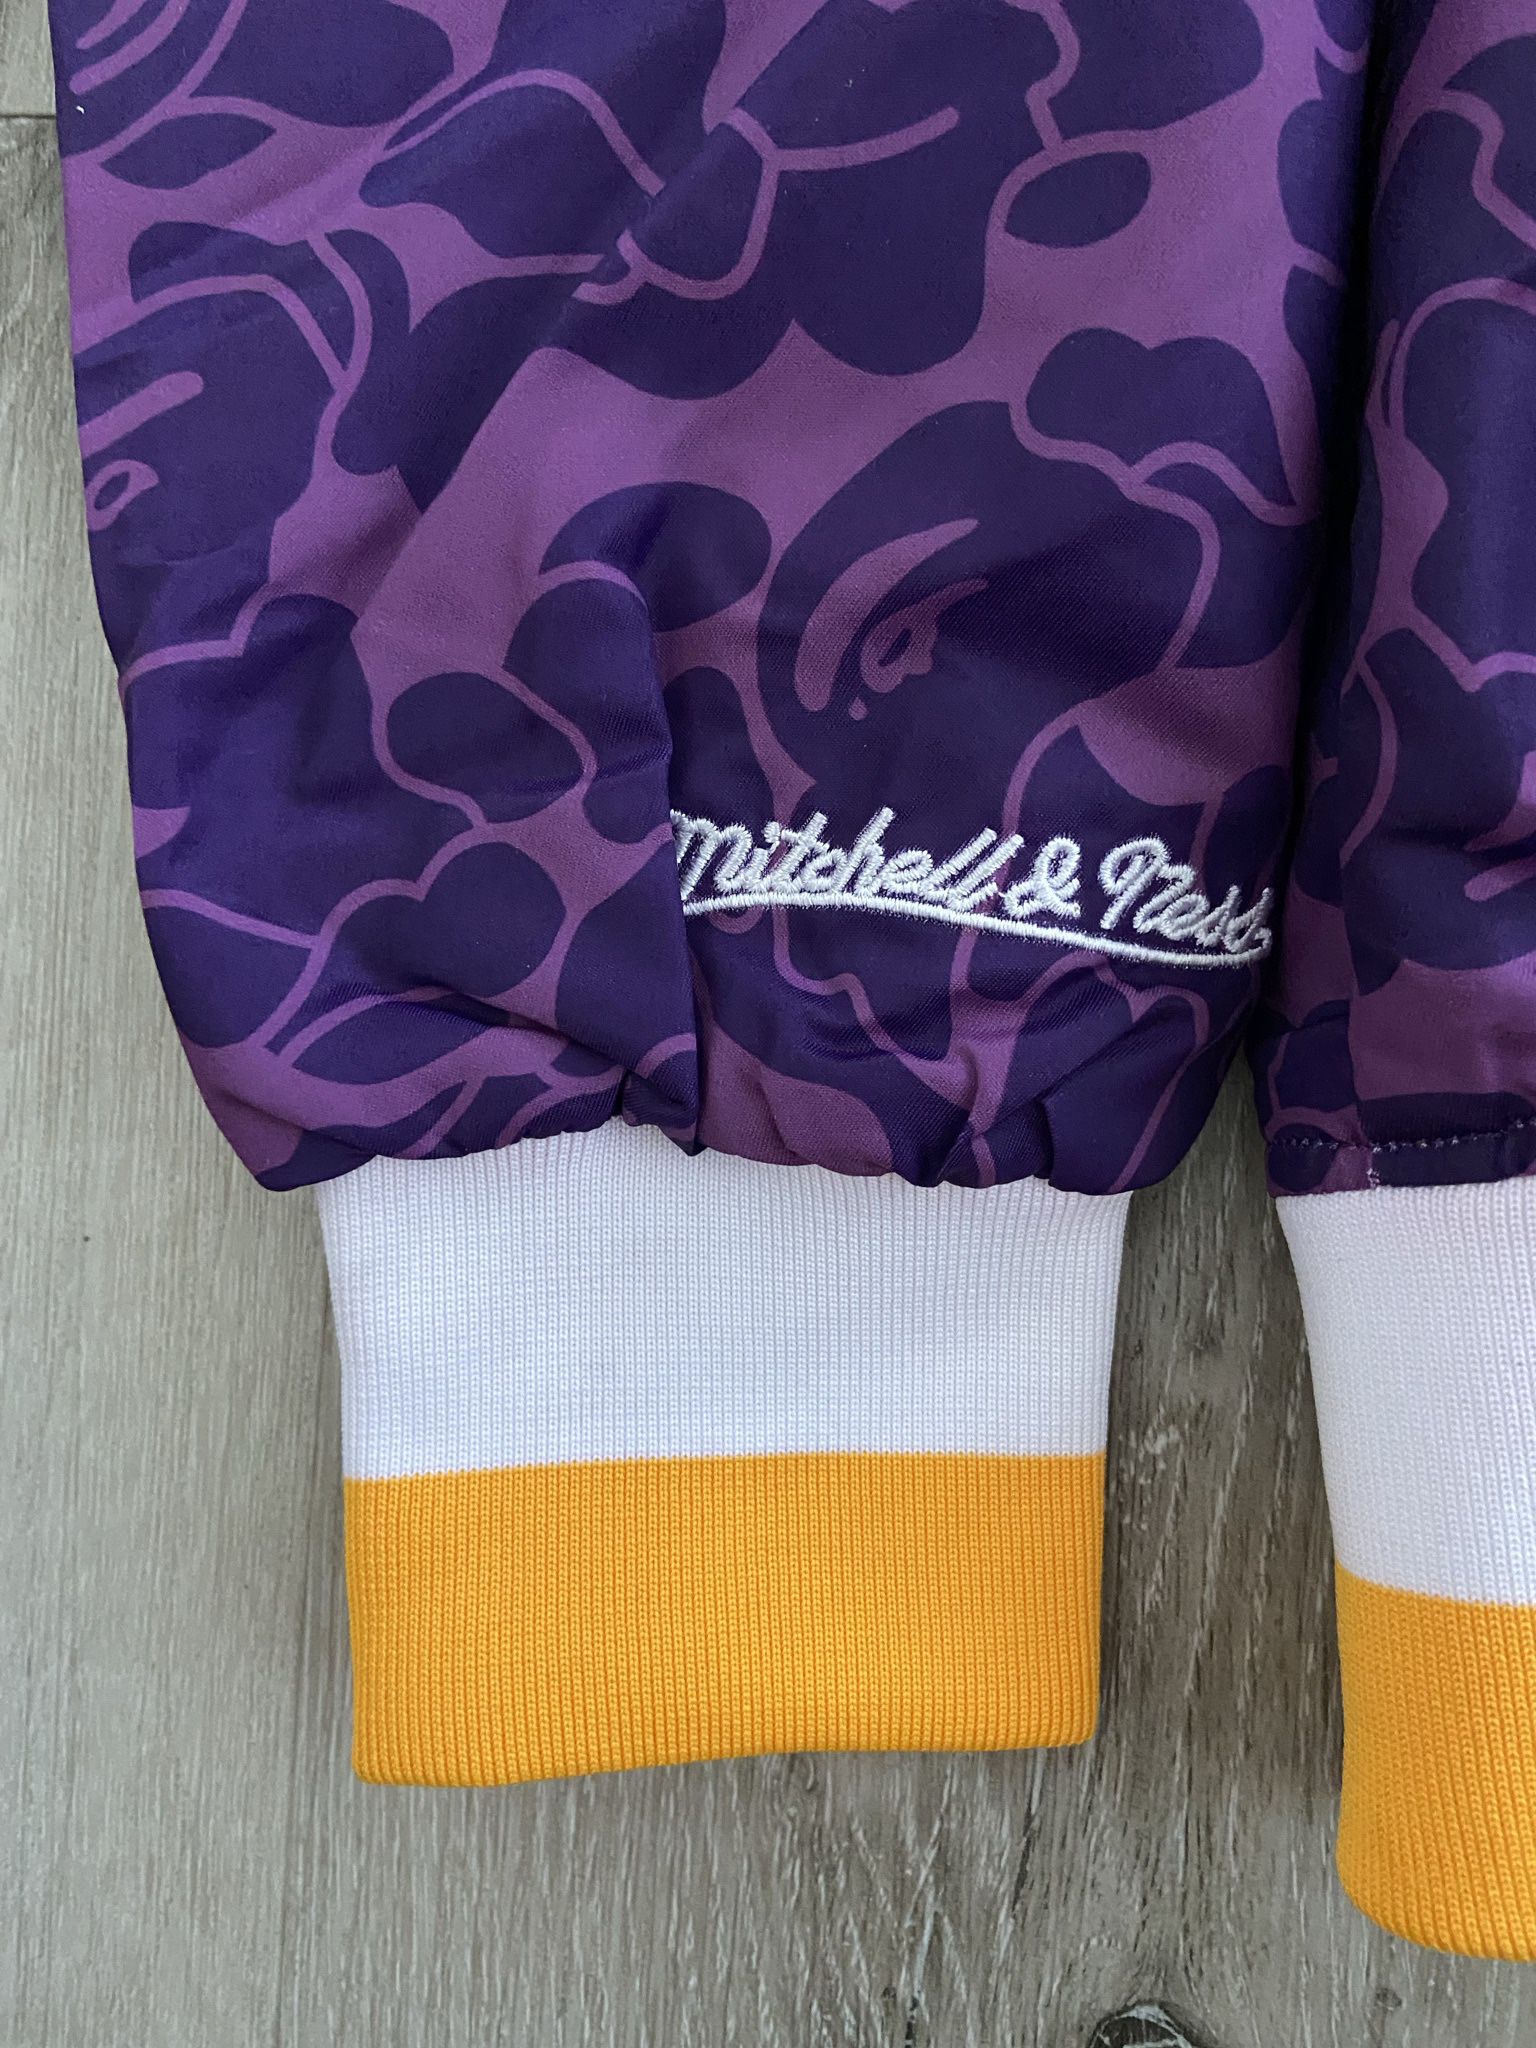 Lakers Vomb Jacket for Sale in Los Angeles, CA - OfferUp